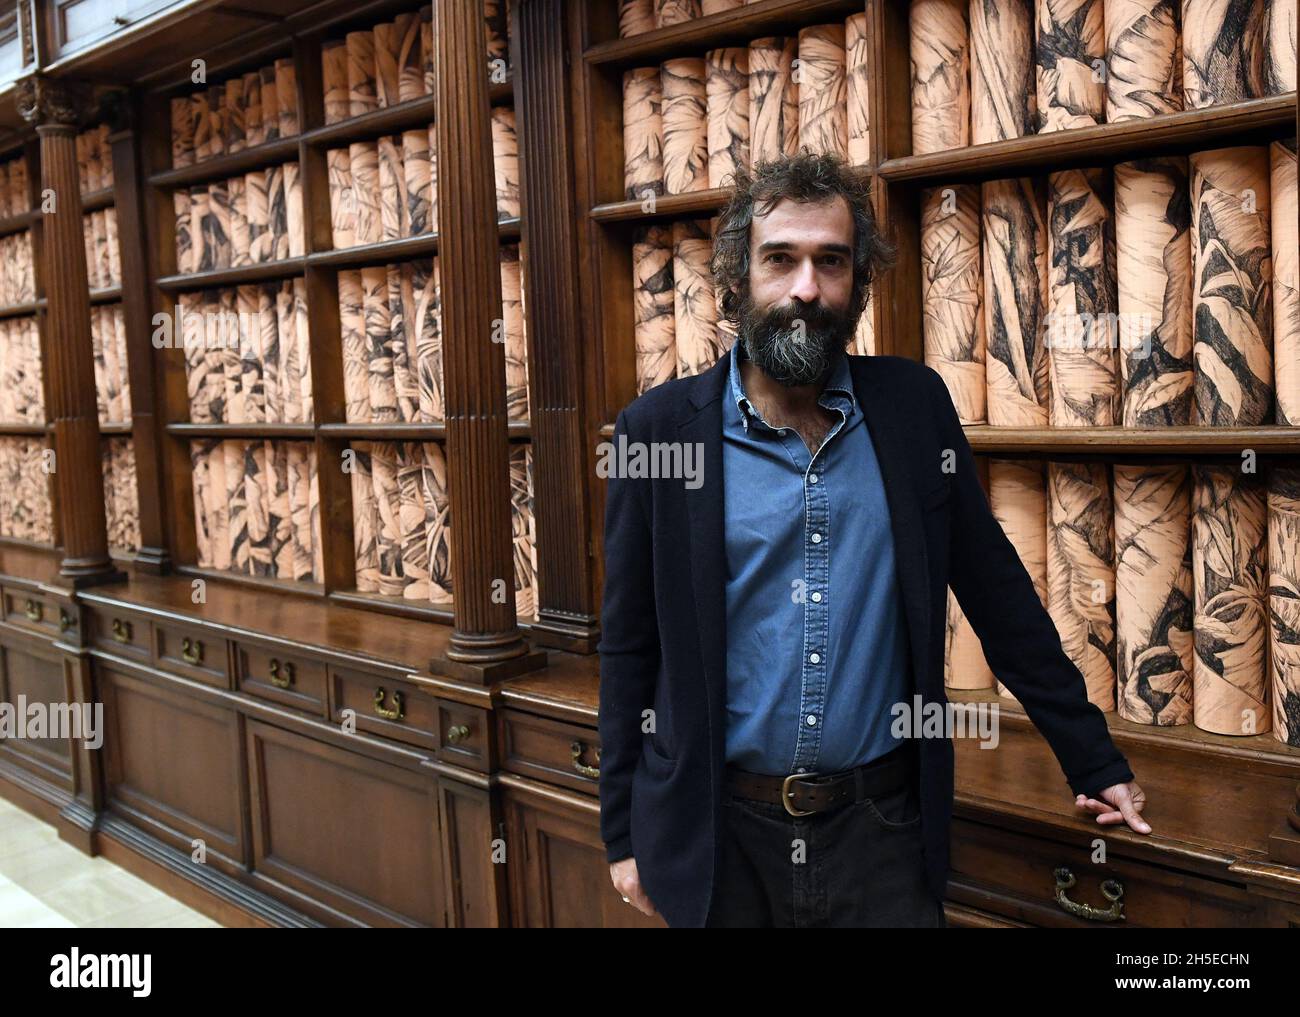 Italian artist Pietro Ruffo poses within his site specific installation 'The Clearest Way' in the Barberini Hall of the Vatican Library transformed âinto a lush tropical forestâ with Ruffo's rolled botanical prints lining the 17th-century wooden bookcases on November 08, 2021at the Vatican. The Apostolic Library is opening up to the public for the first time with a dedicated space for temporary exhibitions of contemporary art by Italian artist Pietro Ruffo. The exhibit goes under the title âEveryone: Humanity on its way, recalls the Pope s encyclical Fratelli tutti, and turns part of the Stock Photo